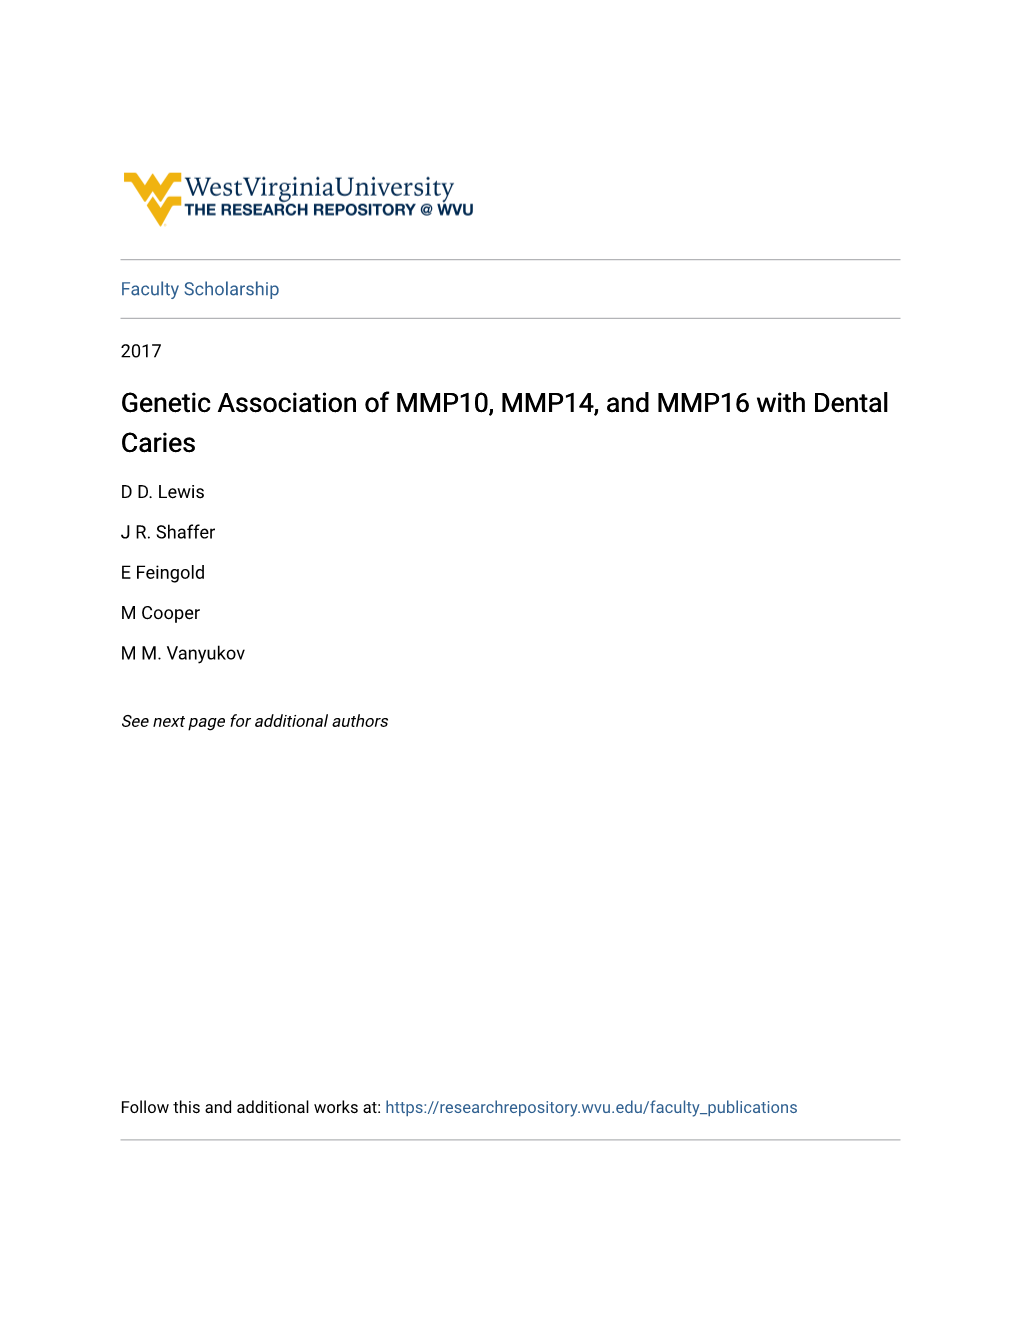 Genetic Association of MMP10, MMP14, and MMP16 with Dental Caries